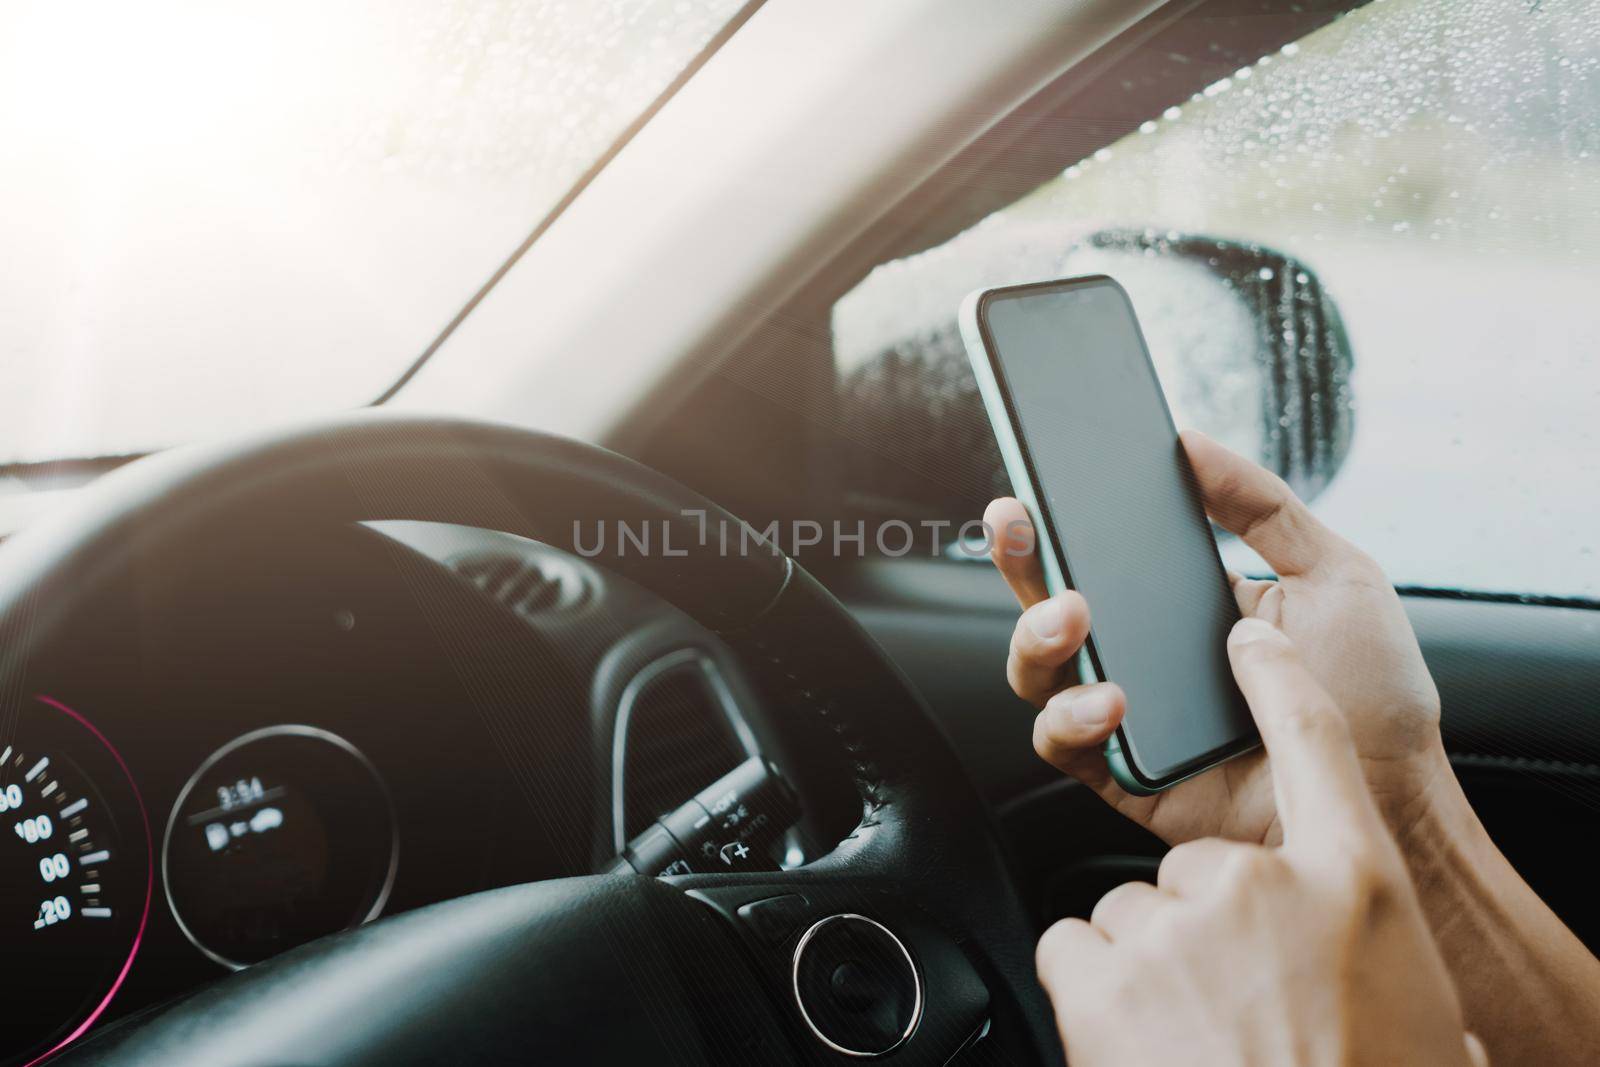 Hand of woman on steering wheel drive a car while using smartphone sunlight background.